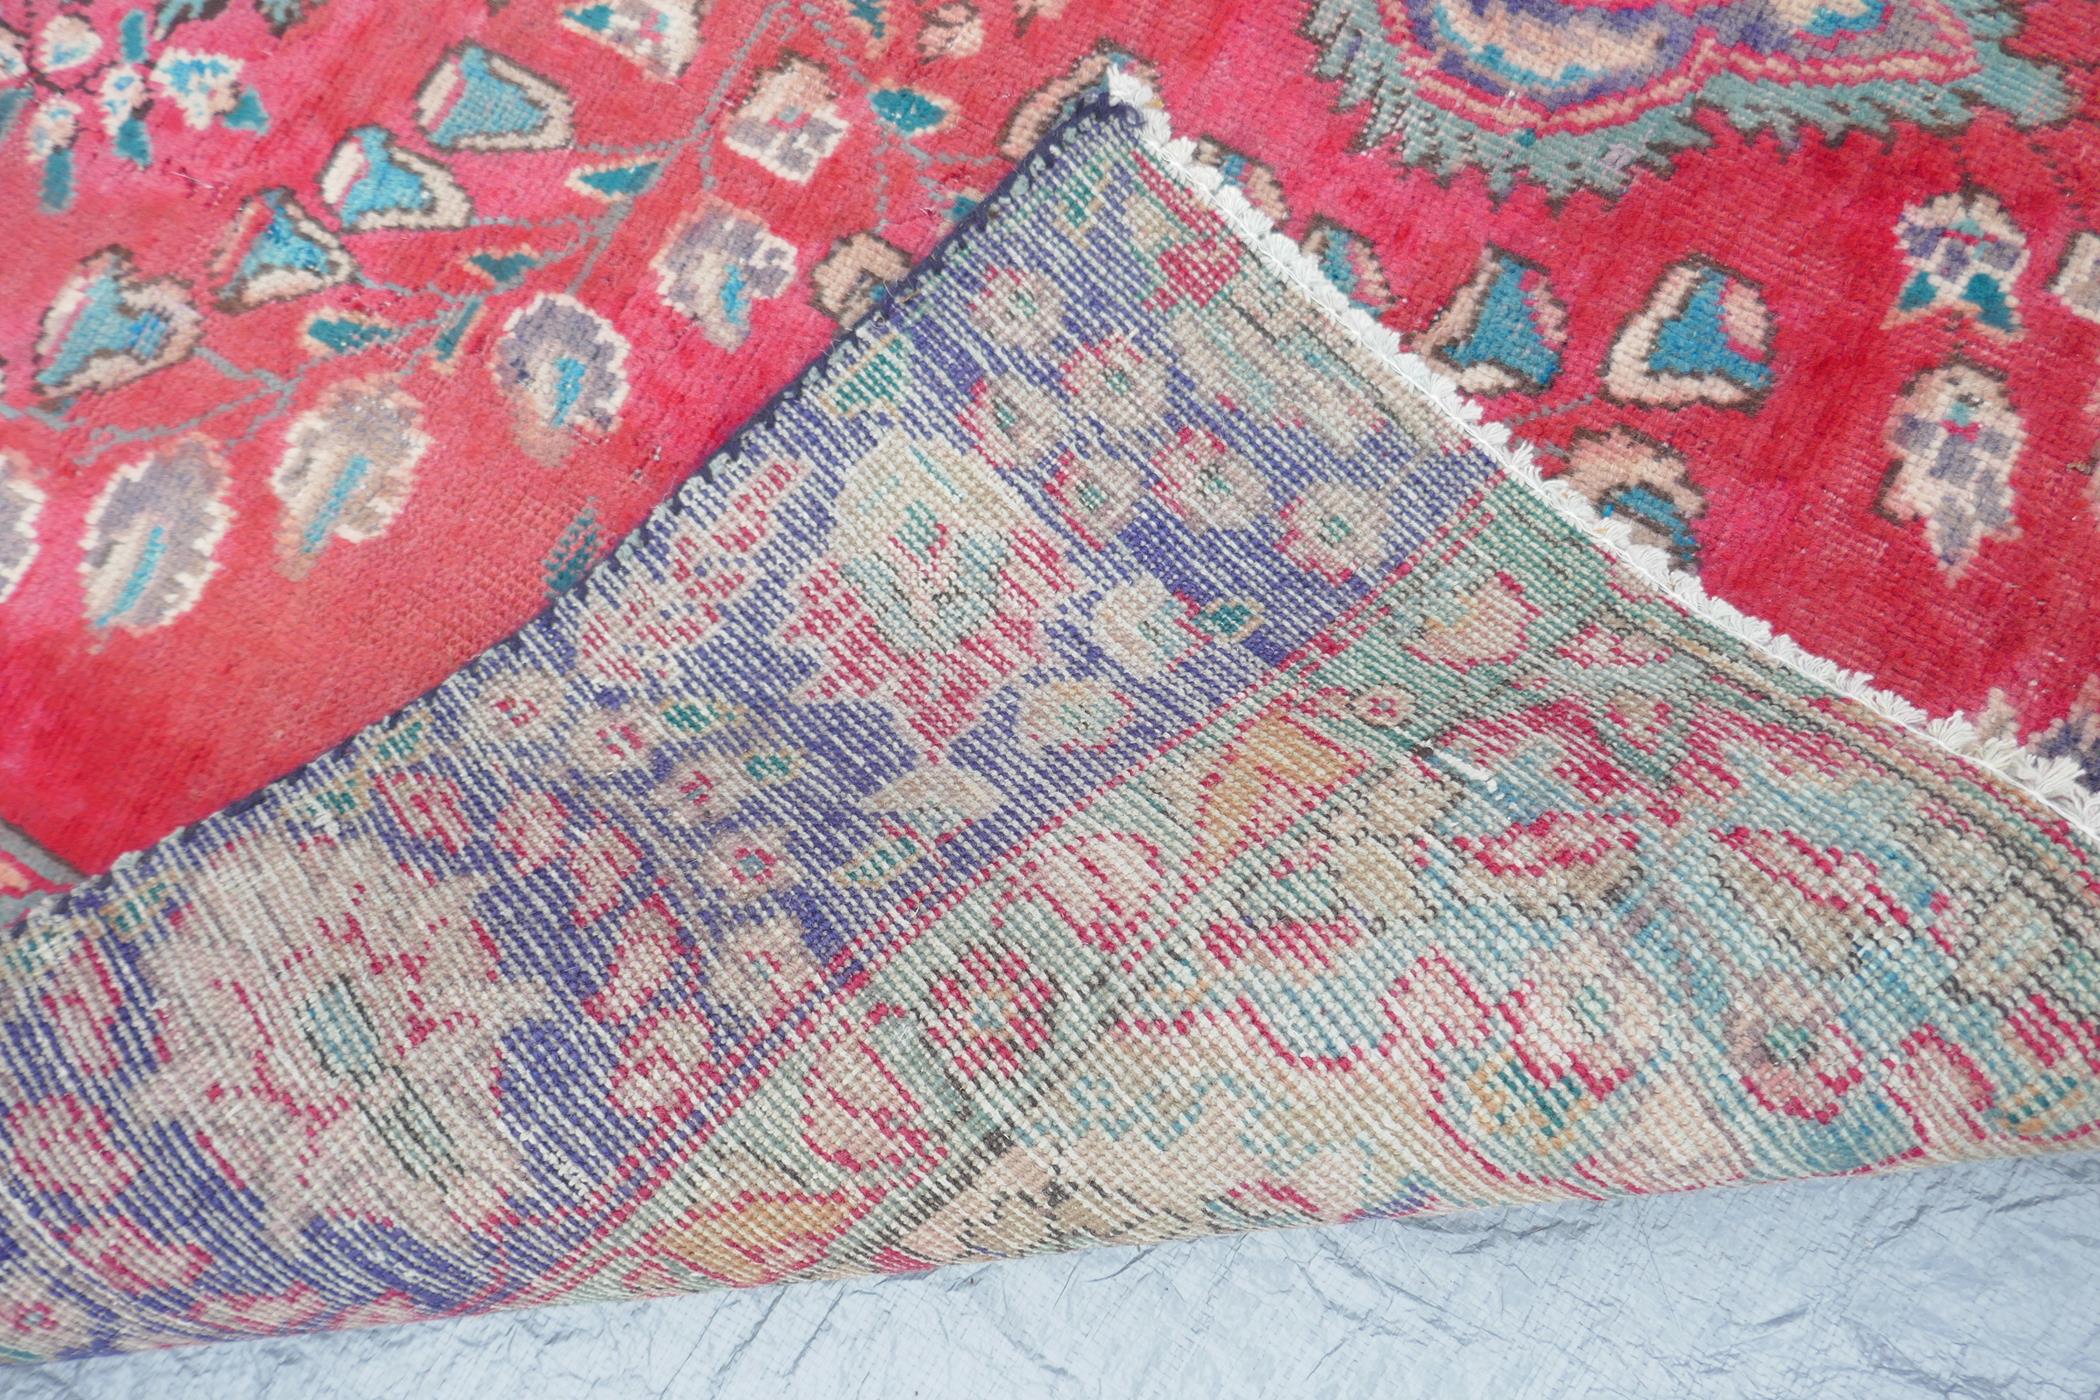 A vintage Iranian carpet from the Tabriz region, with a floral medallion design on a red field - Image 4 of 5